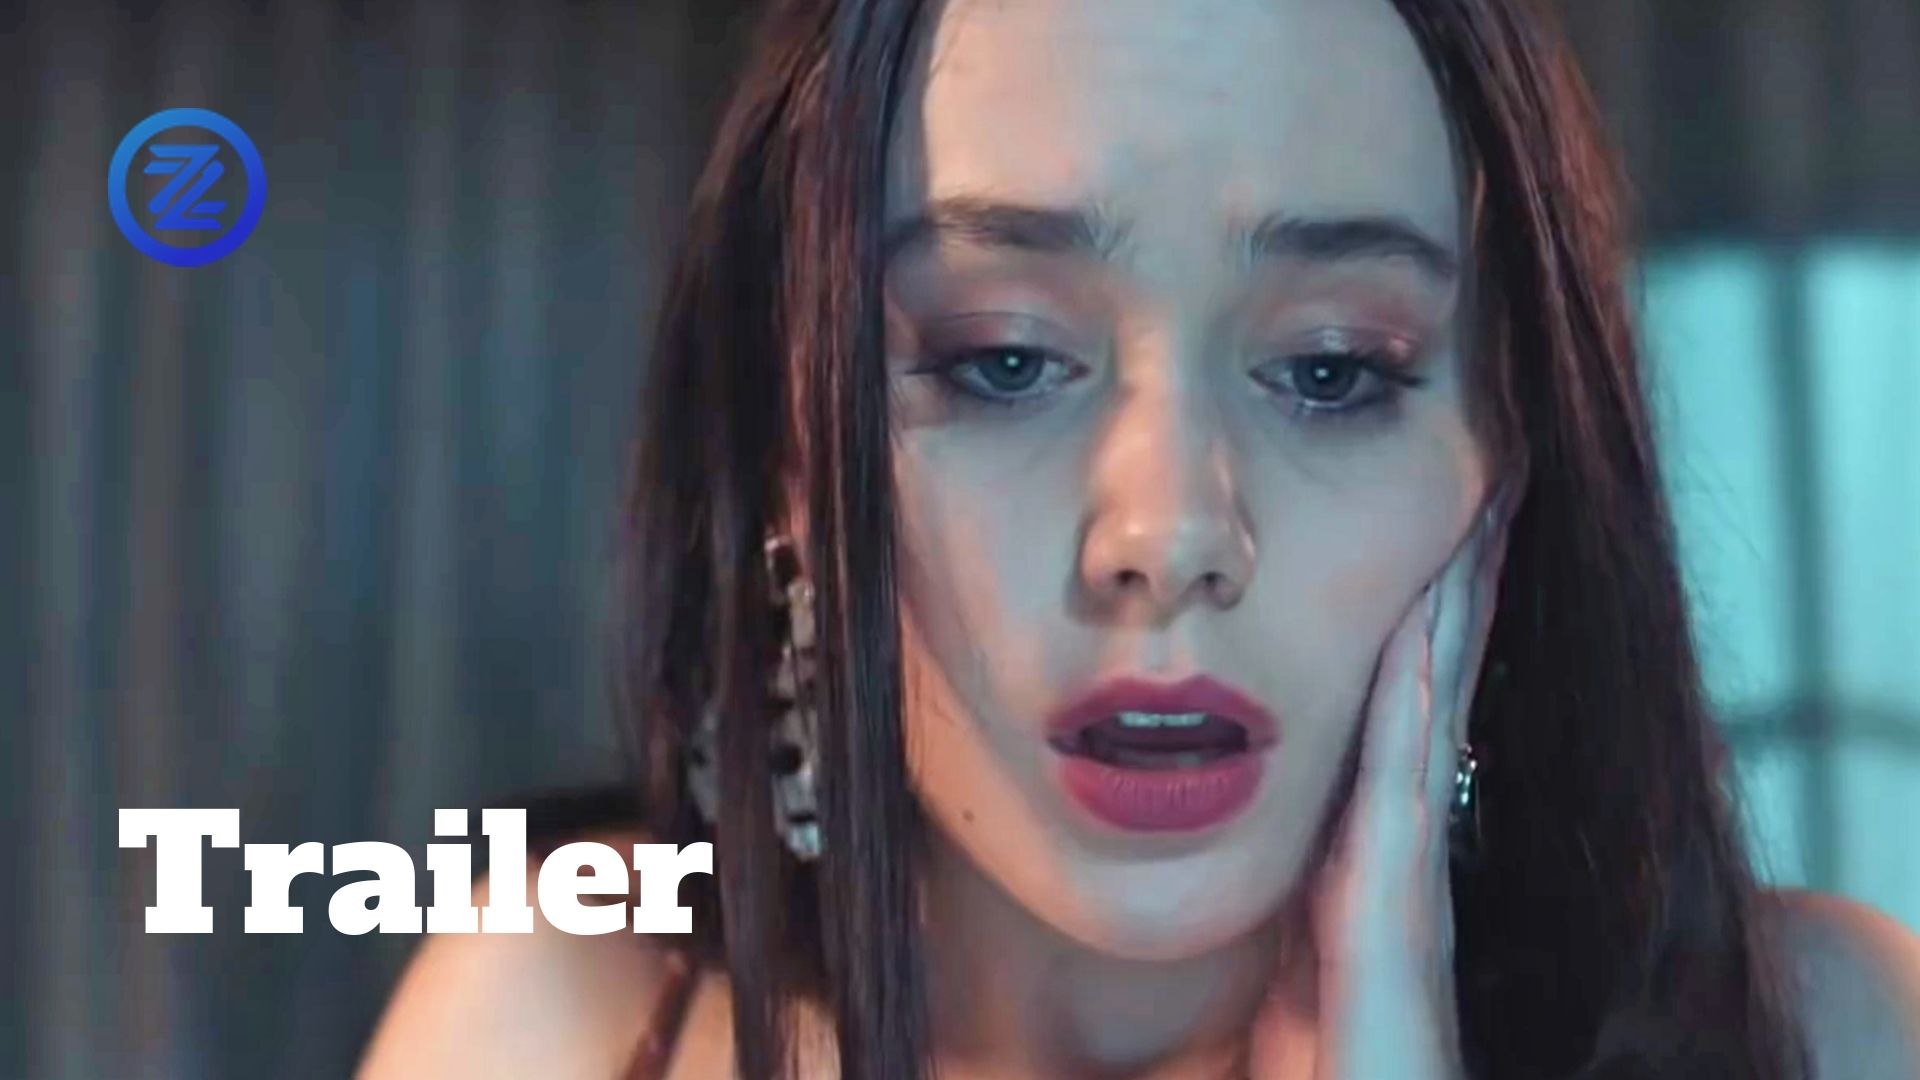 Trapped Model Trailer #1 (2019) Lucy Loken, Wes McGee Thriller Movie HD -  video Dailymotion